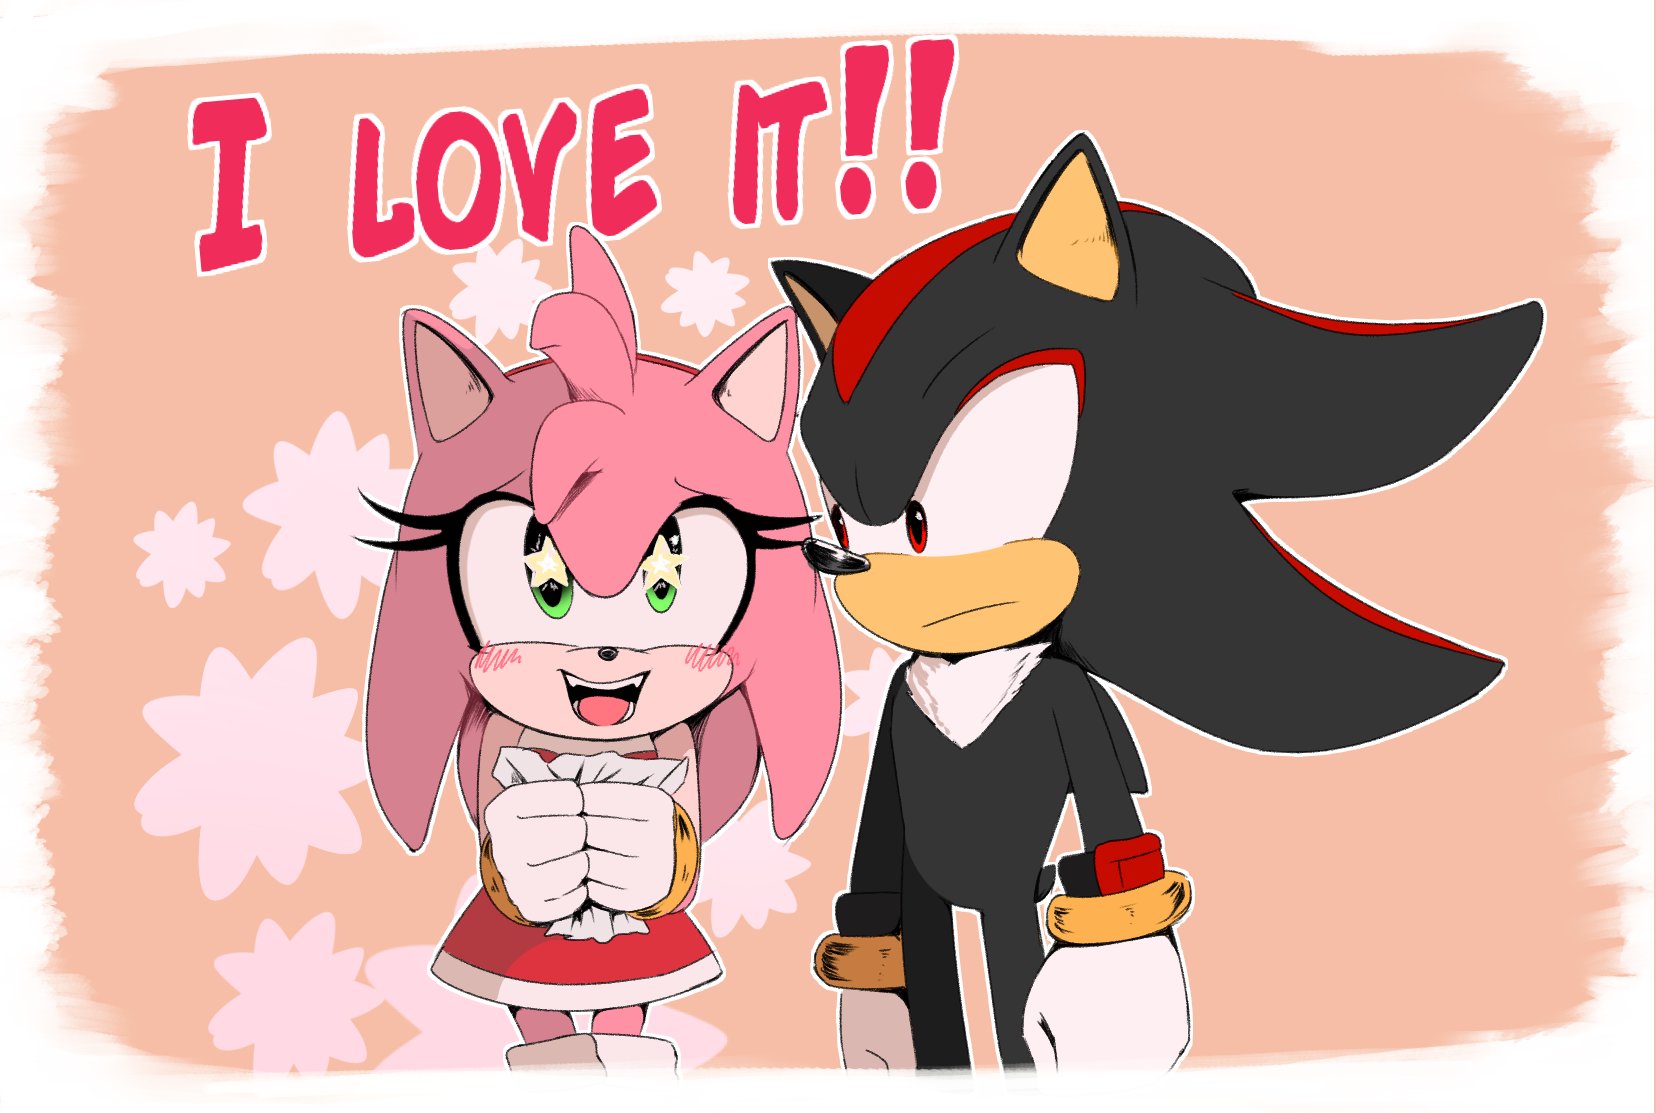 Kitare - COMMS OPEN! on X: What if Amy found Shadow